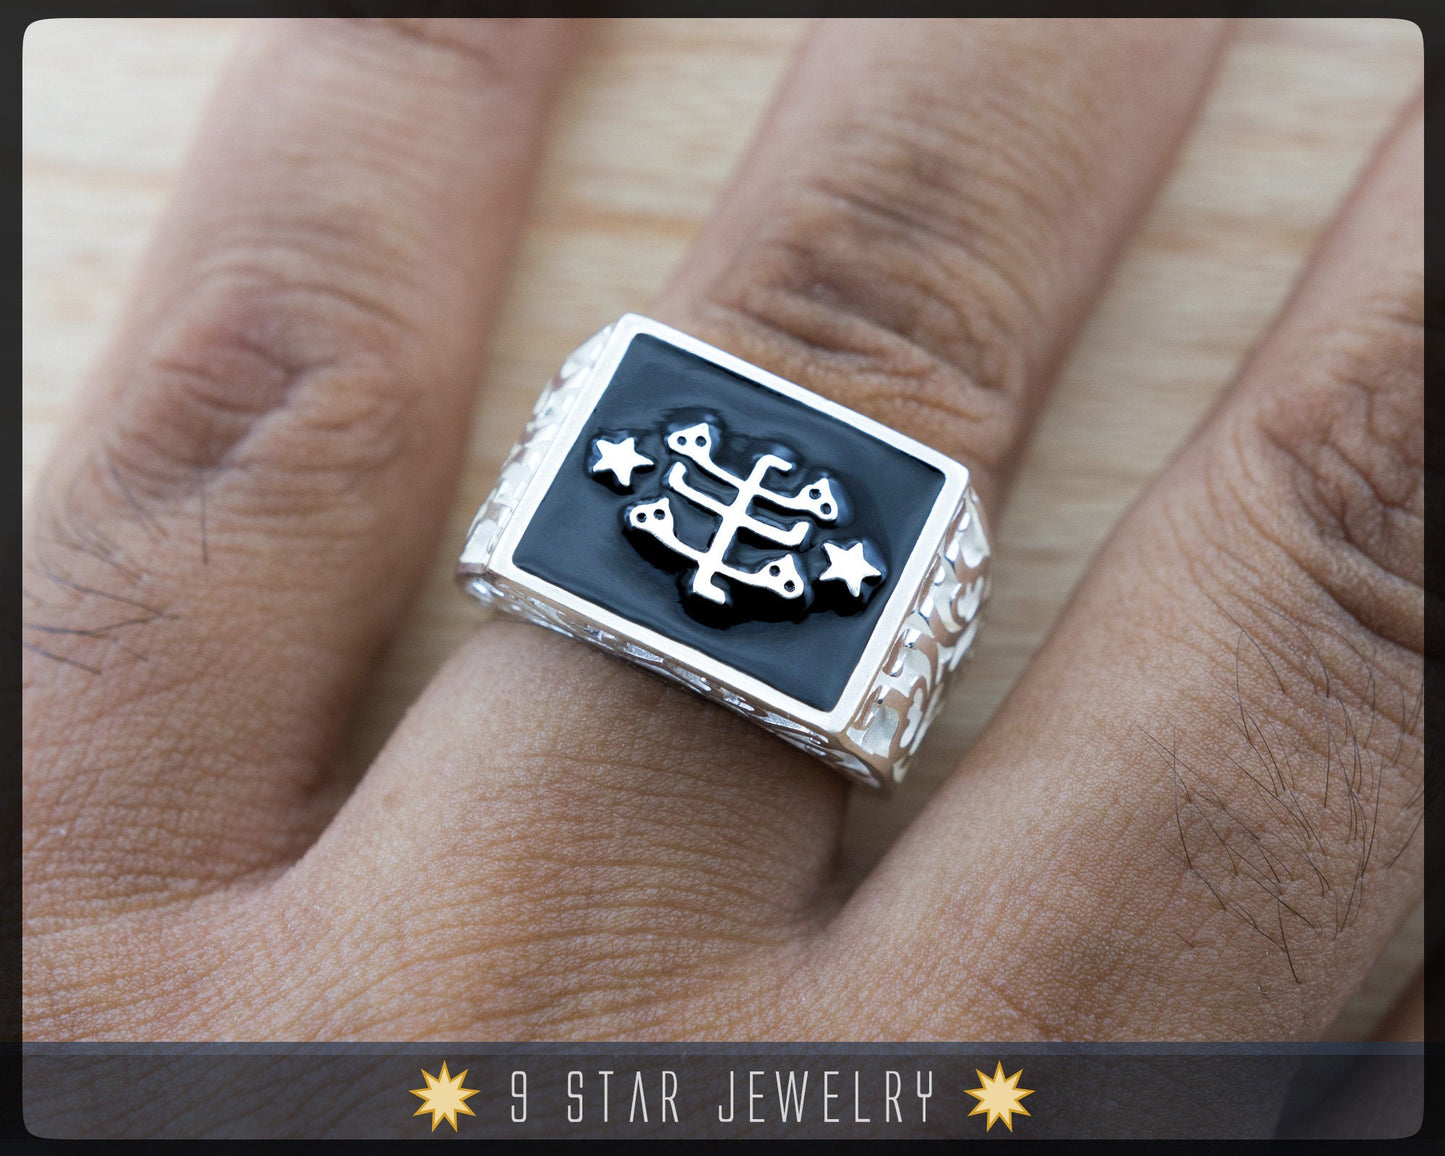 Statement Ring "Ring of Declaration" with Baha'i Ring Stone Symbol: 925 Sterling Silver